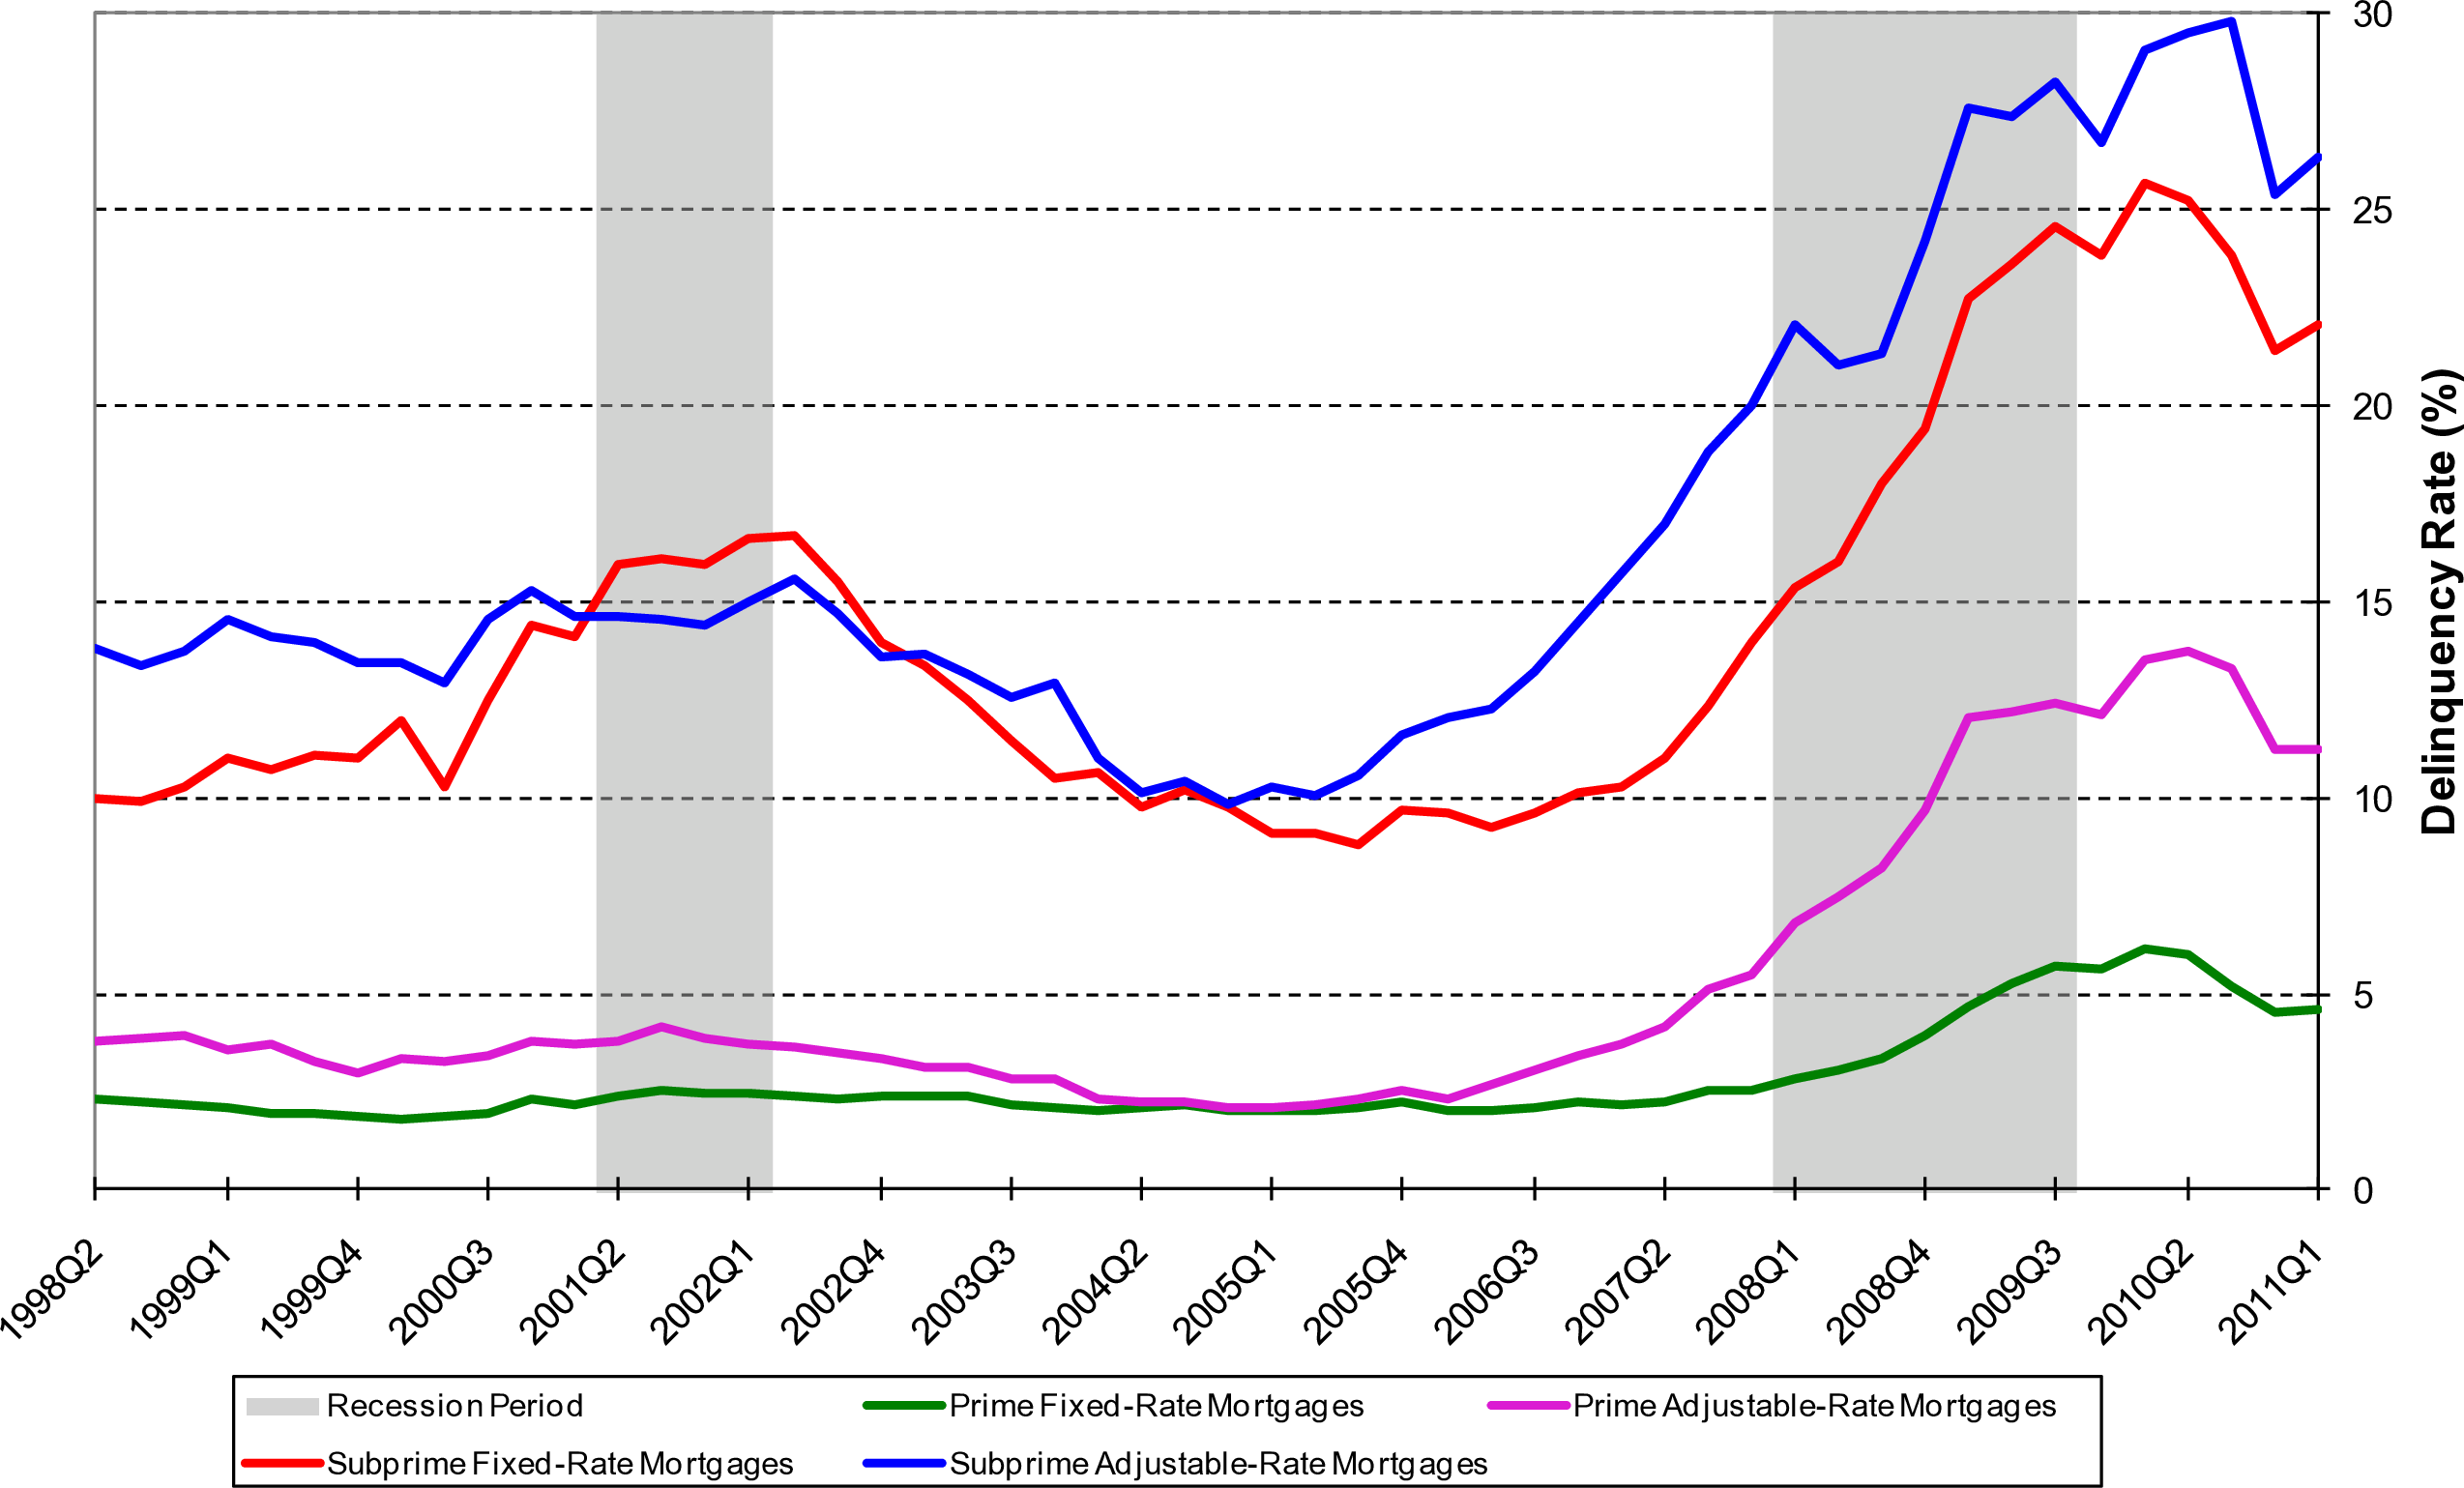 Delinquency Rates on Mortgages: Prime, Subprime, Adjustable, Fixed. Source: Richmond Fed.